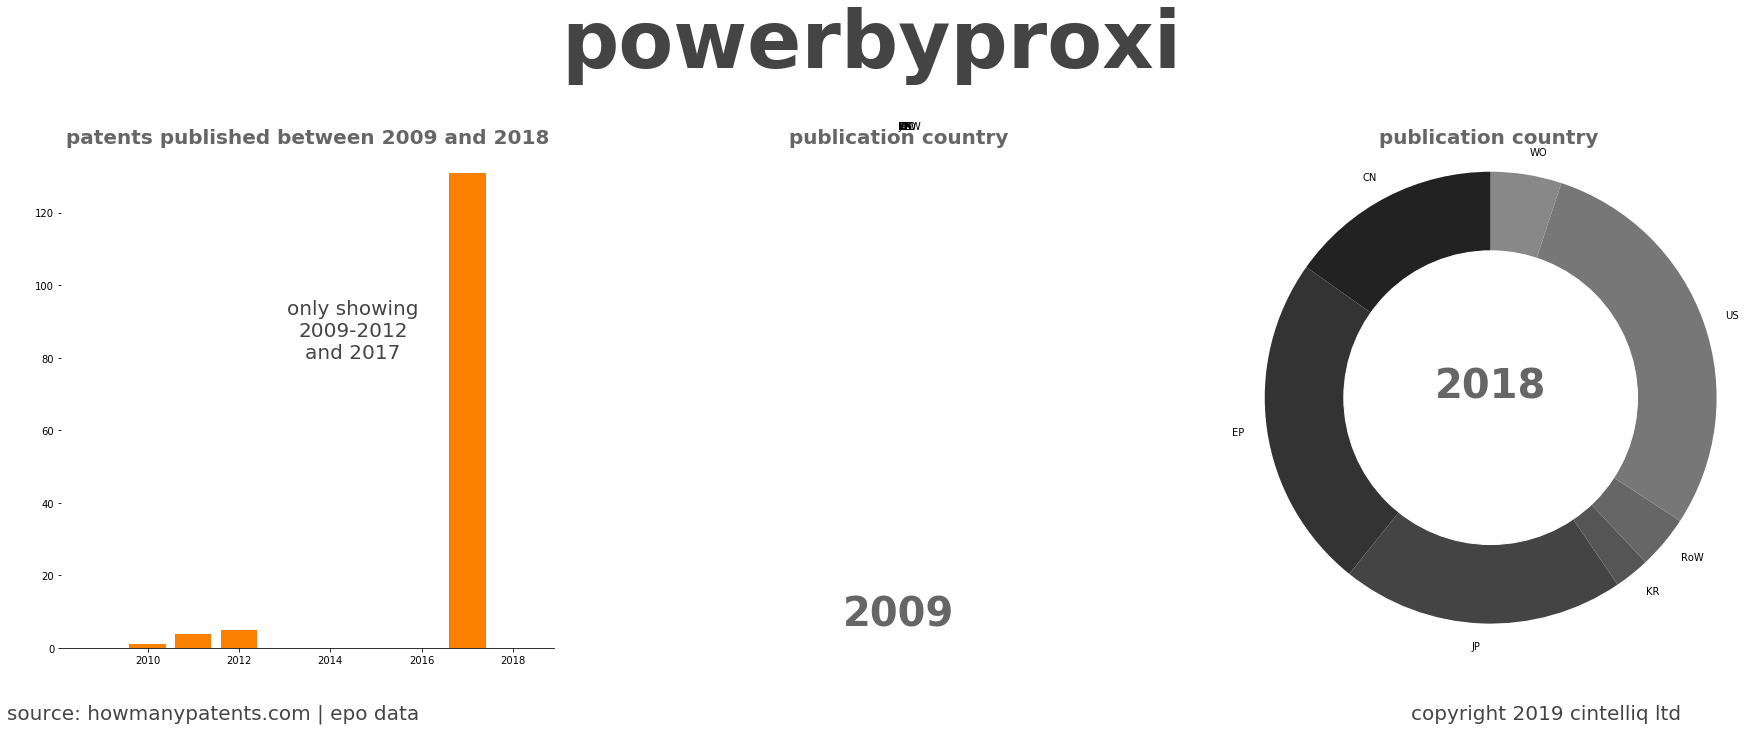 summary of patents for Powerbyproxi